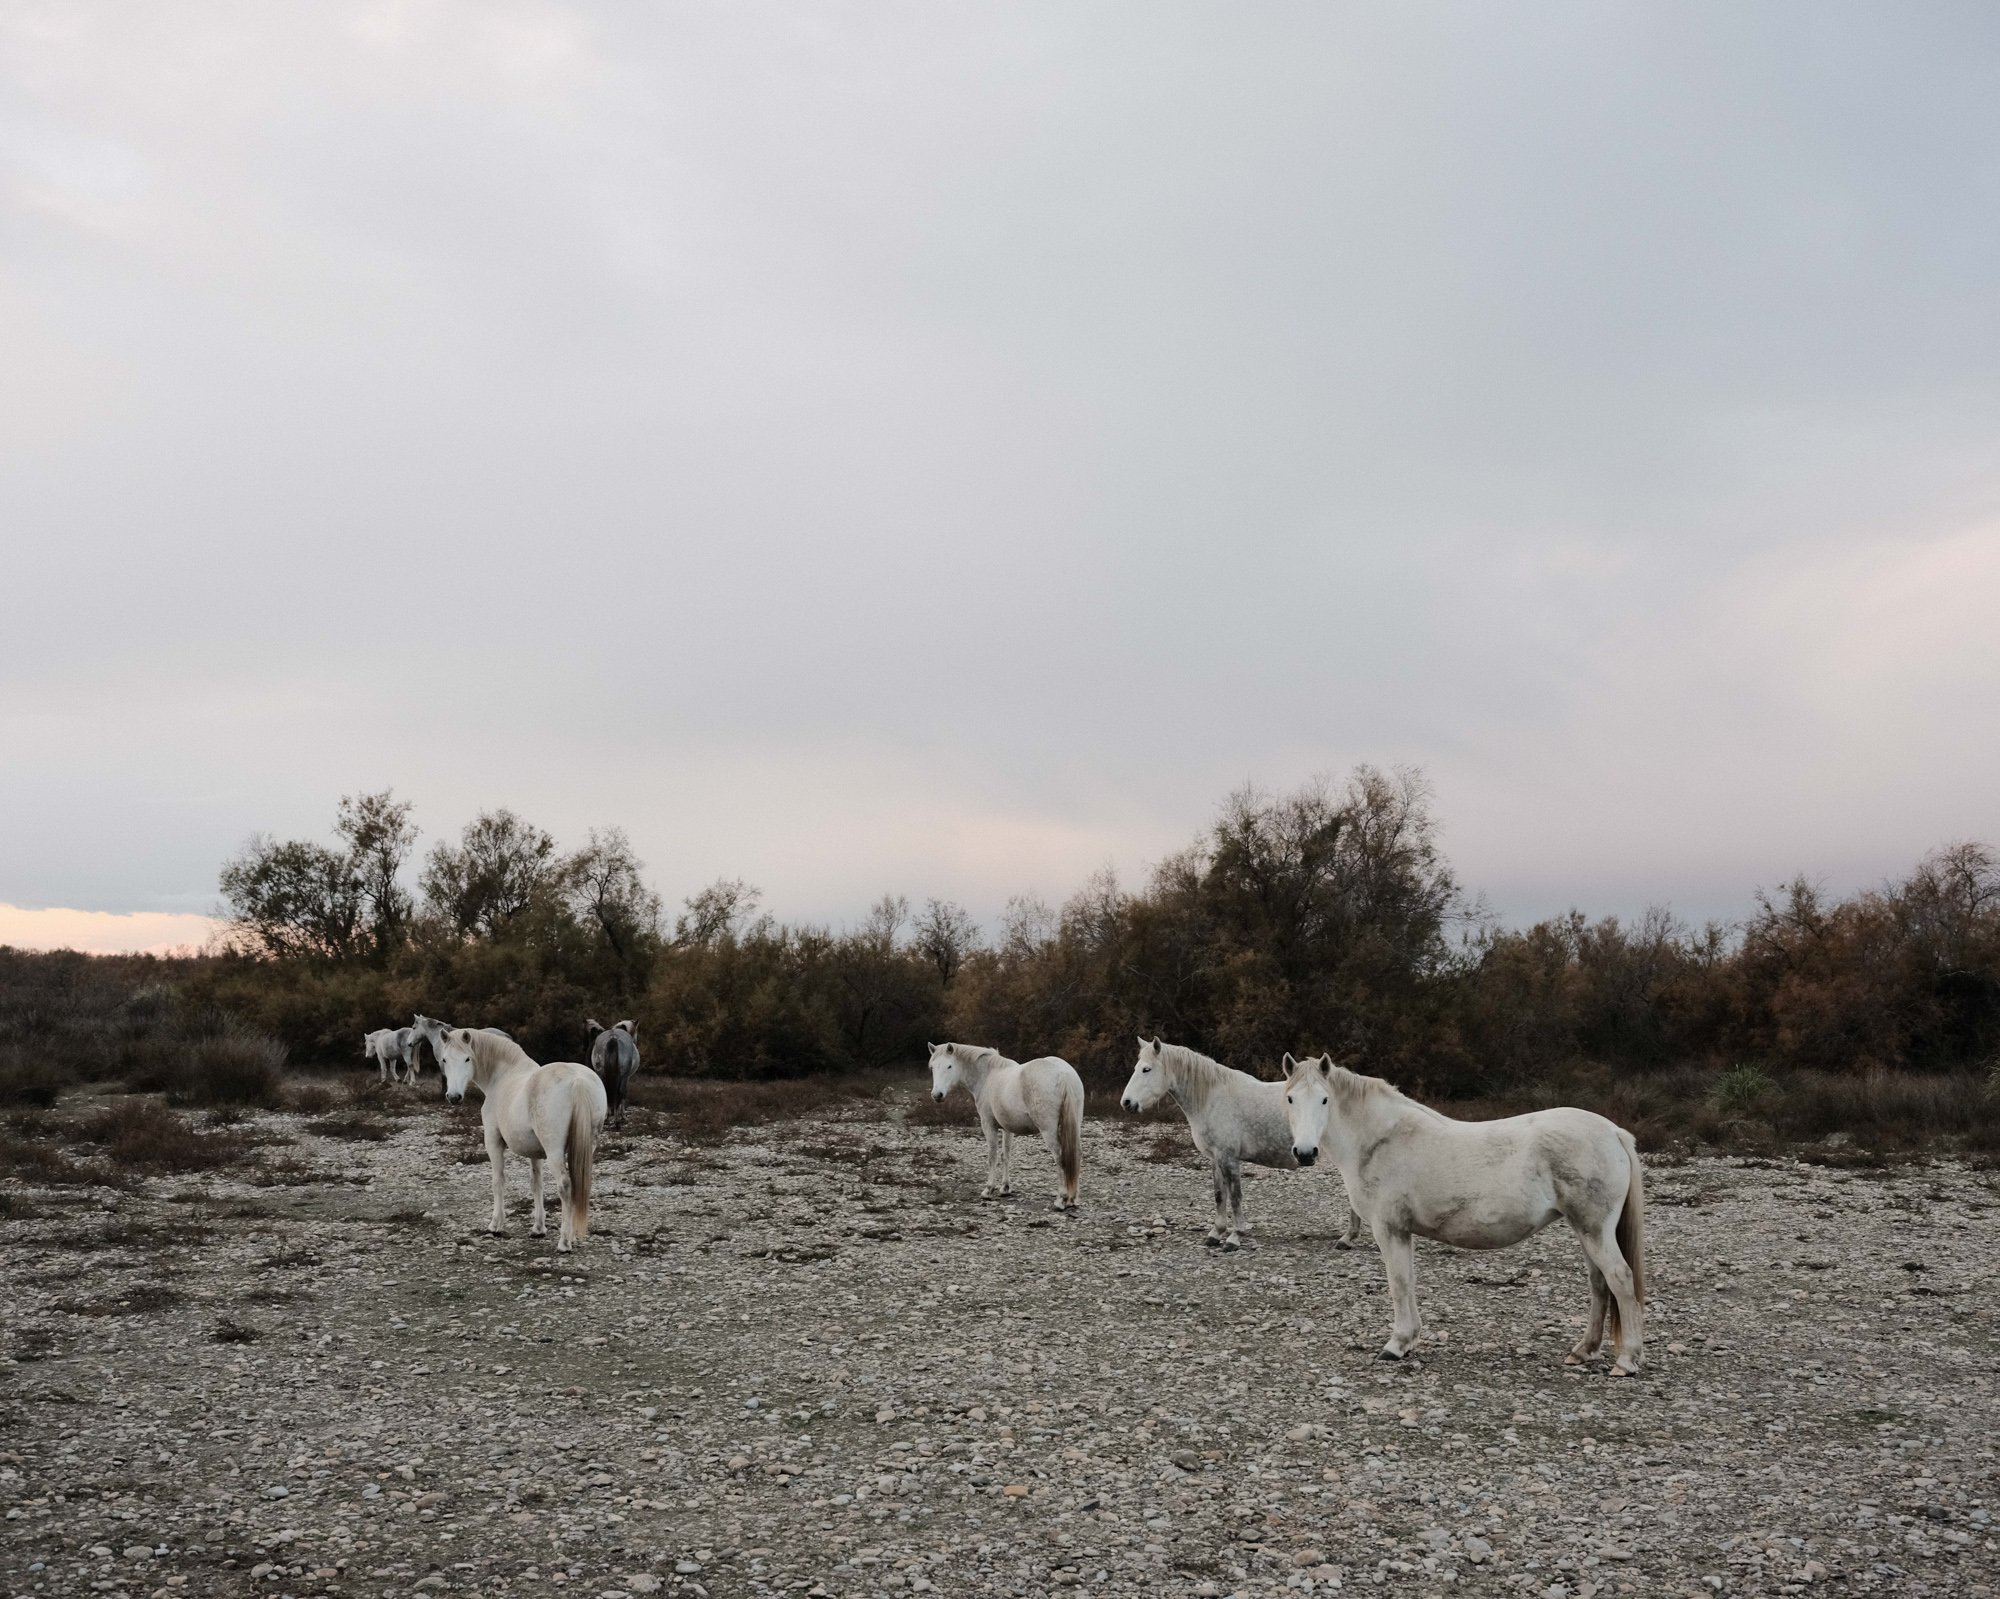  Camargue horses. (semi) wild horses are a natural way of managing and diversifying land due to their grazing and trail patterns. Camargue, France. 